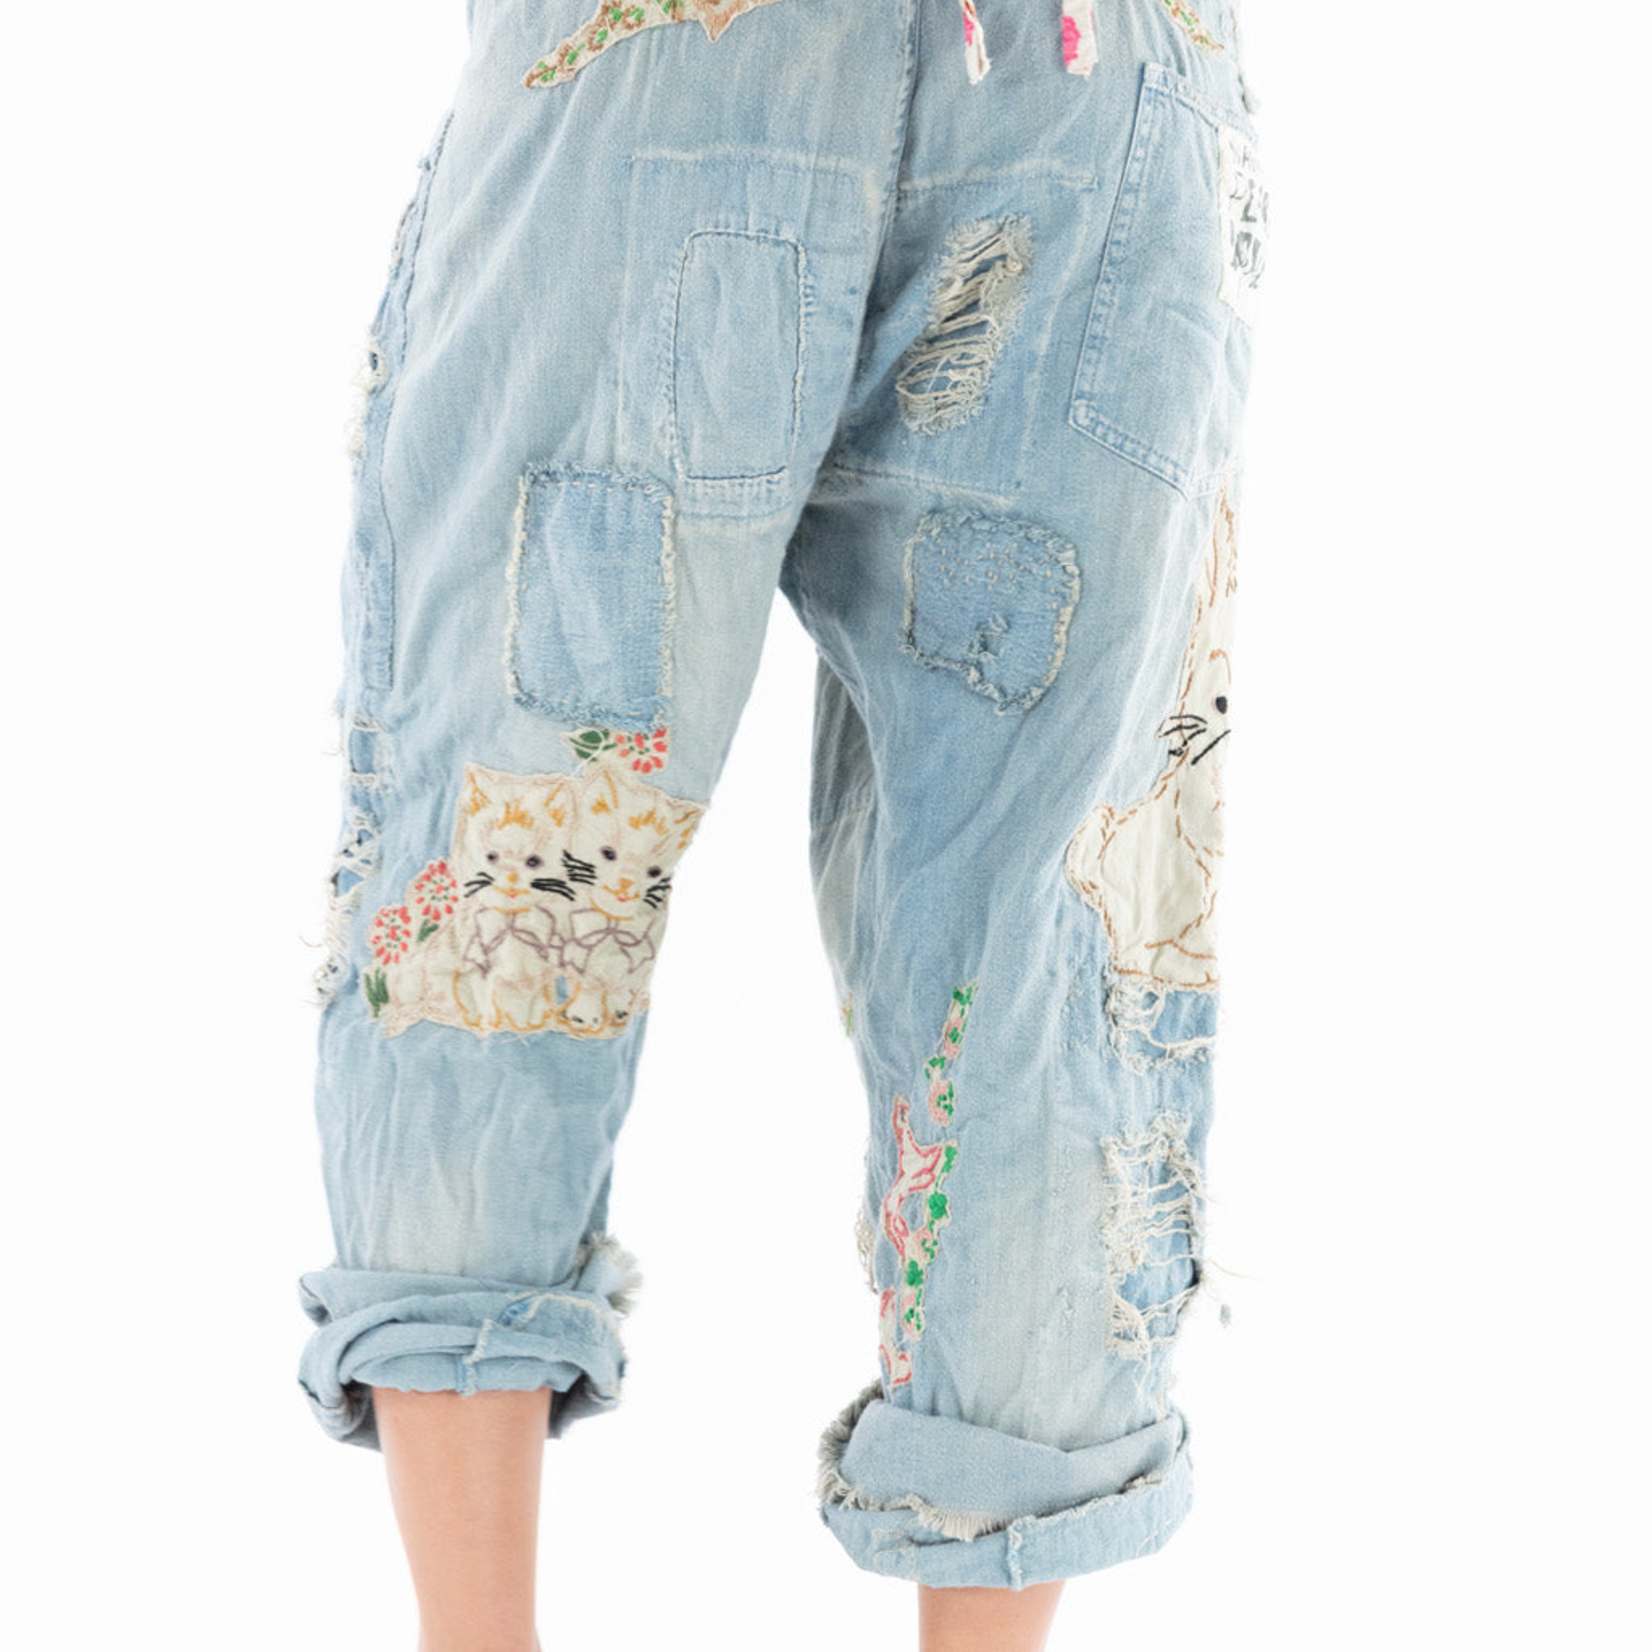 Magnolia Pearl Patchwork Jeans